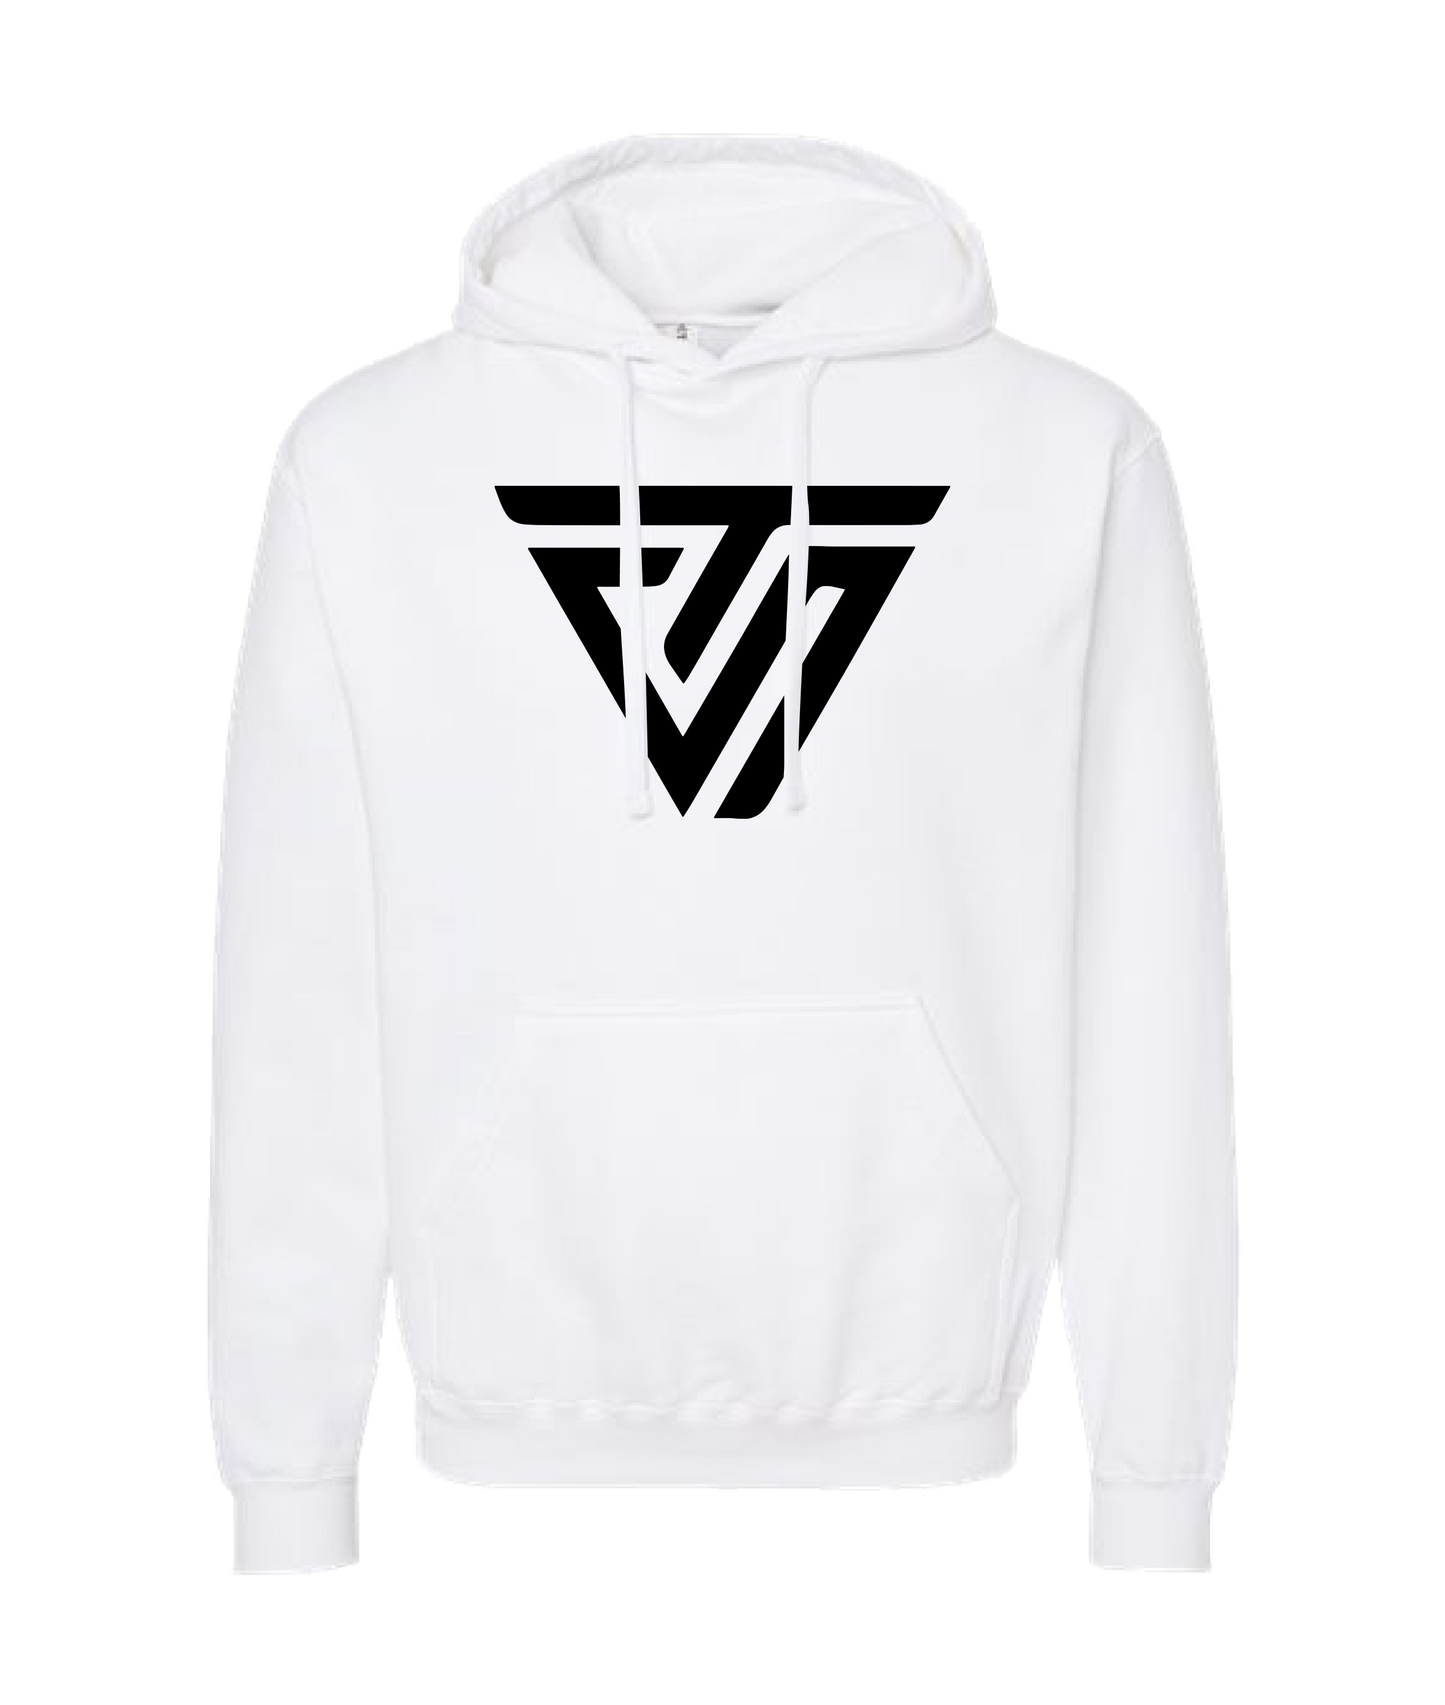 TheShift - Shift Front To Back - Black Hoodie